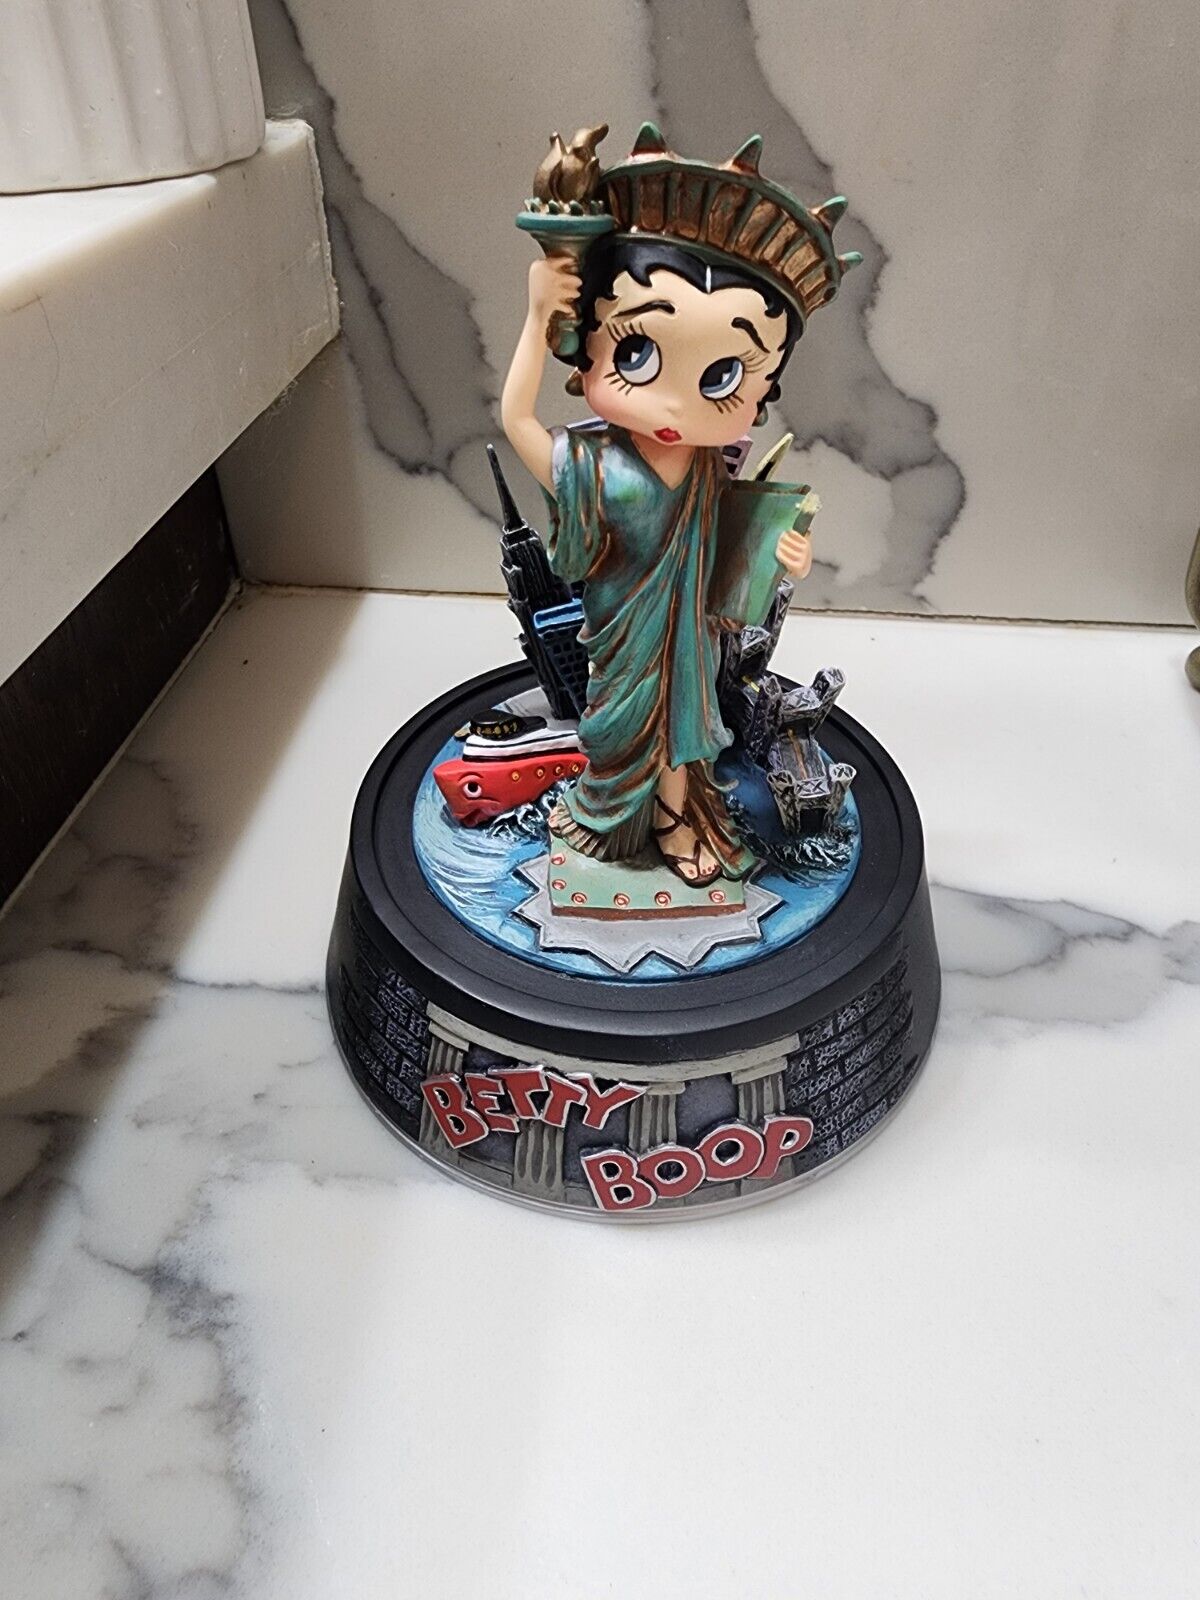 1998 Betty Boop Limited Edition “Liberty Betty” Hand Painted Sculpture Dome